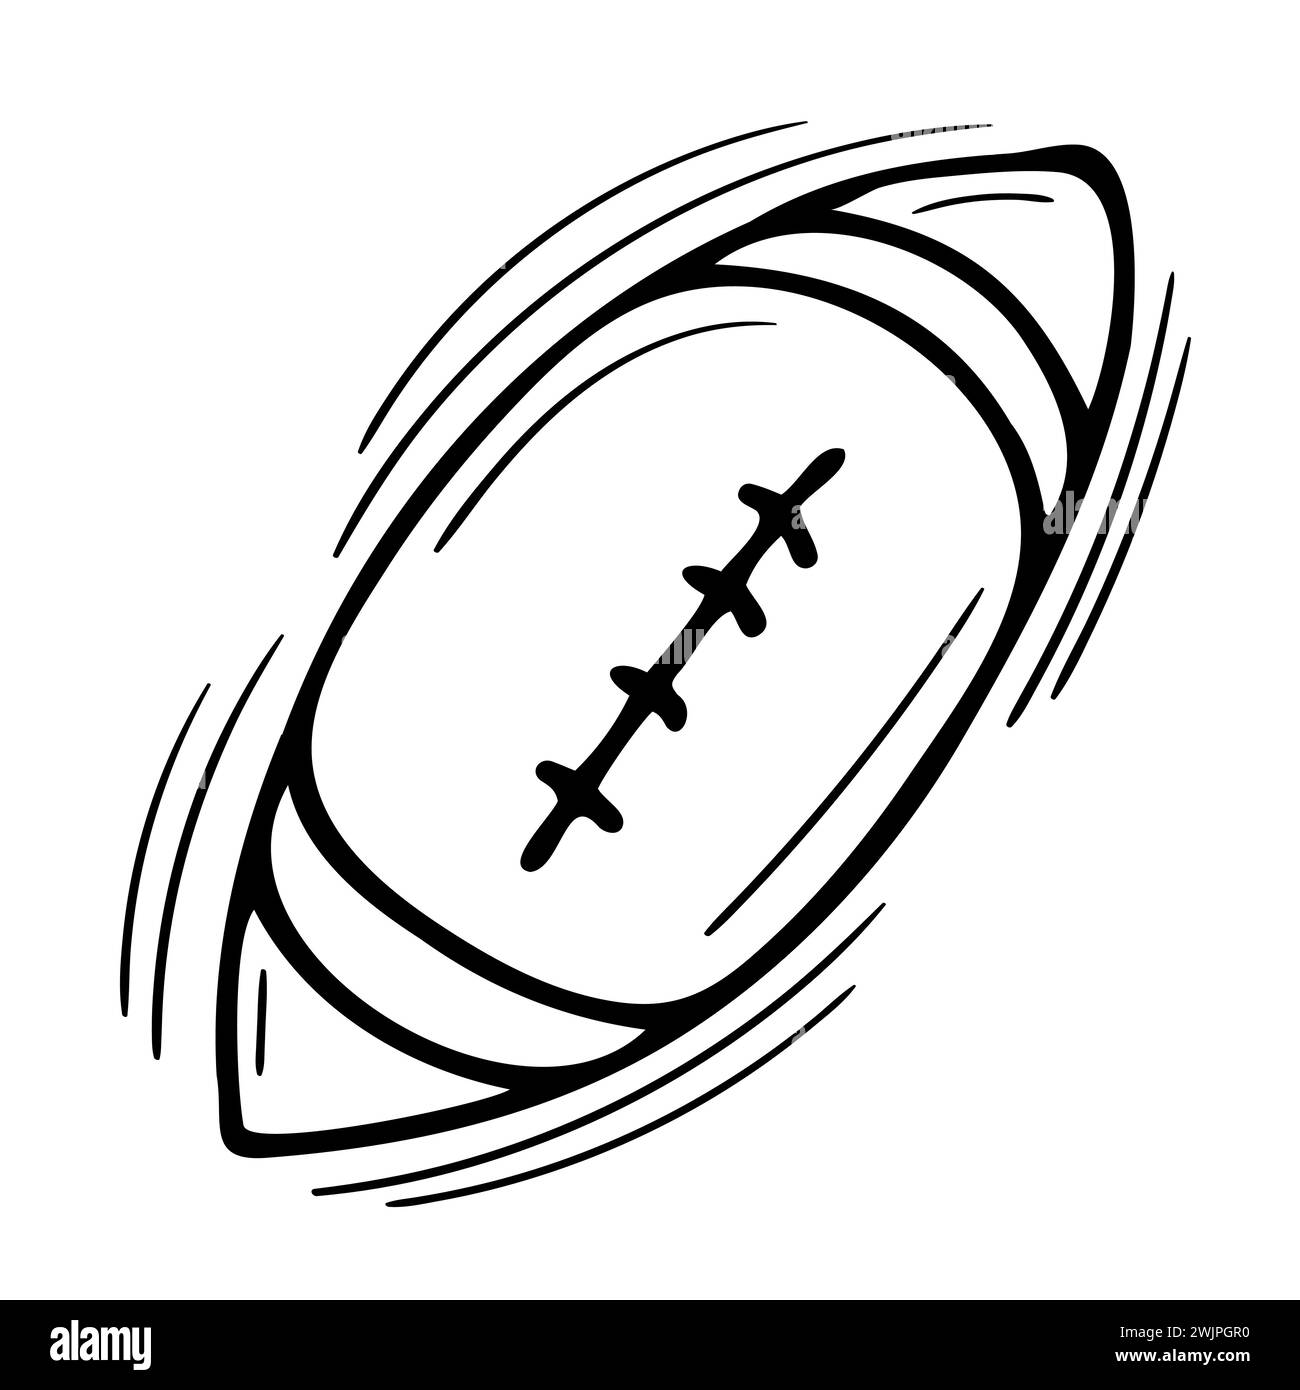 Hand drawn american football ball icon isolated on white background. Vector illustration Stock Vector